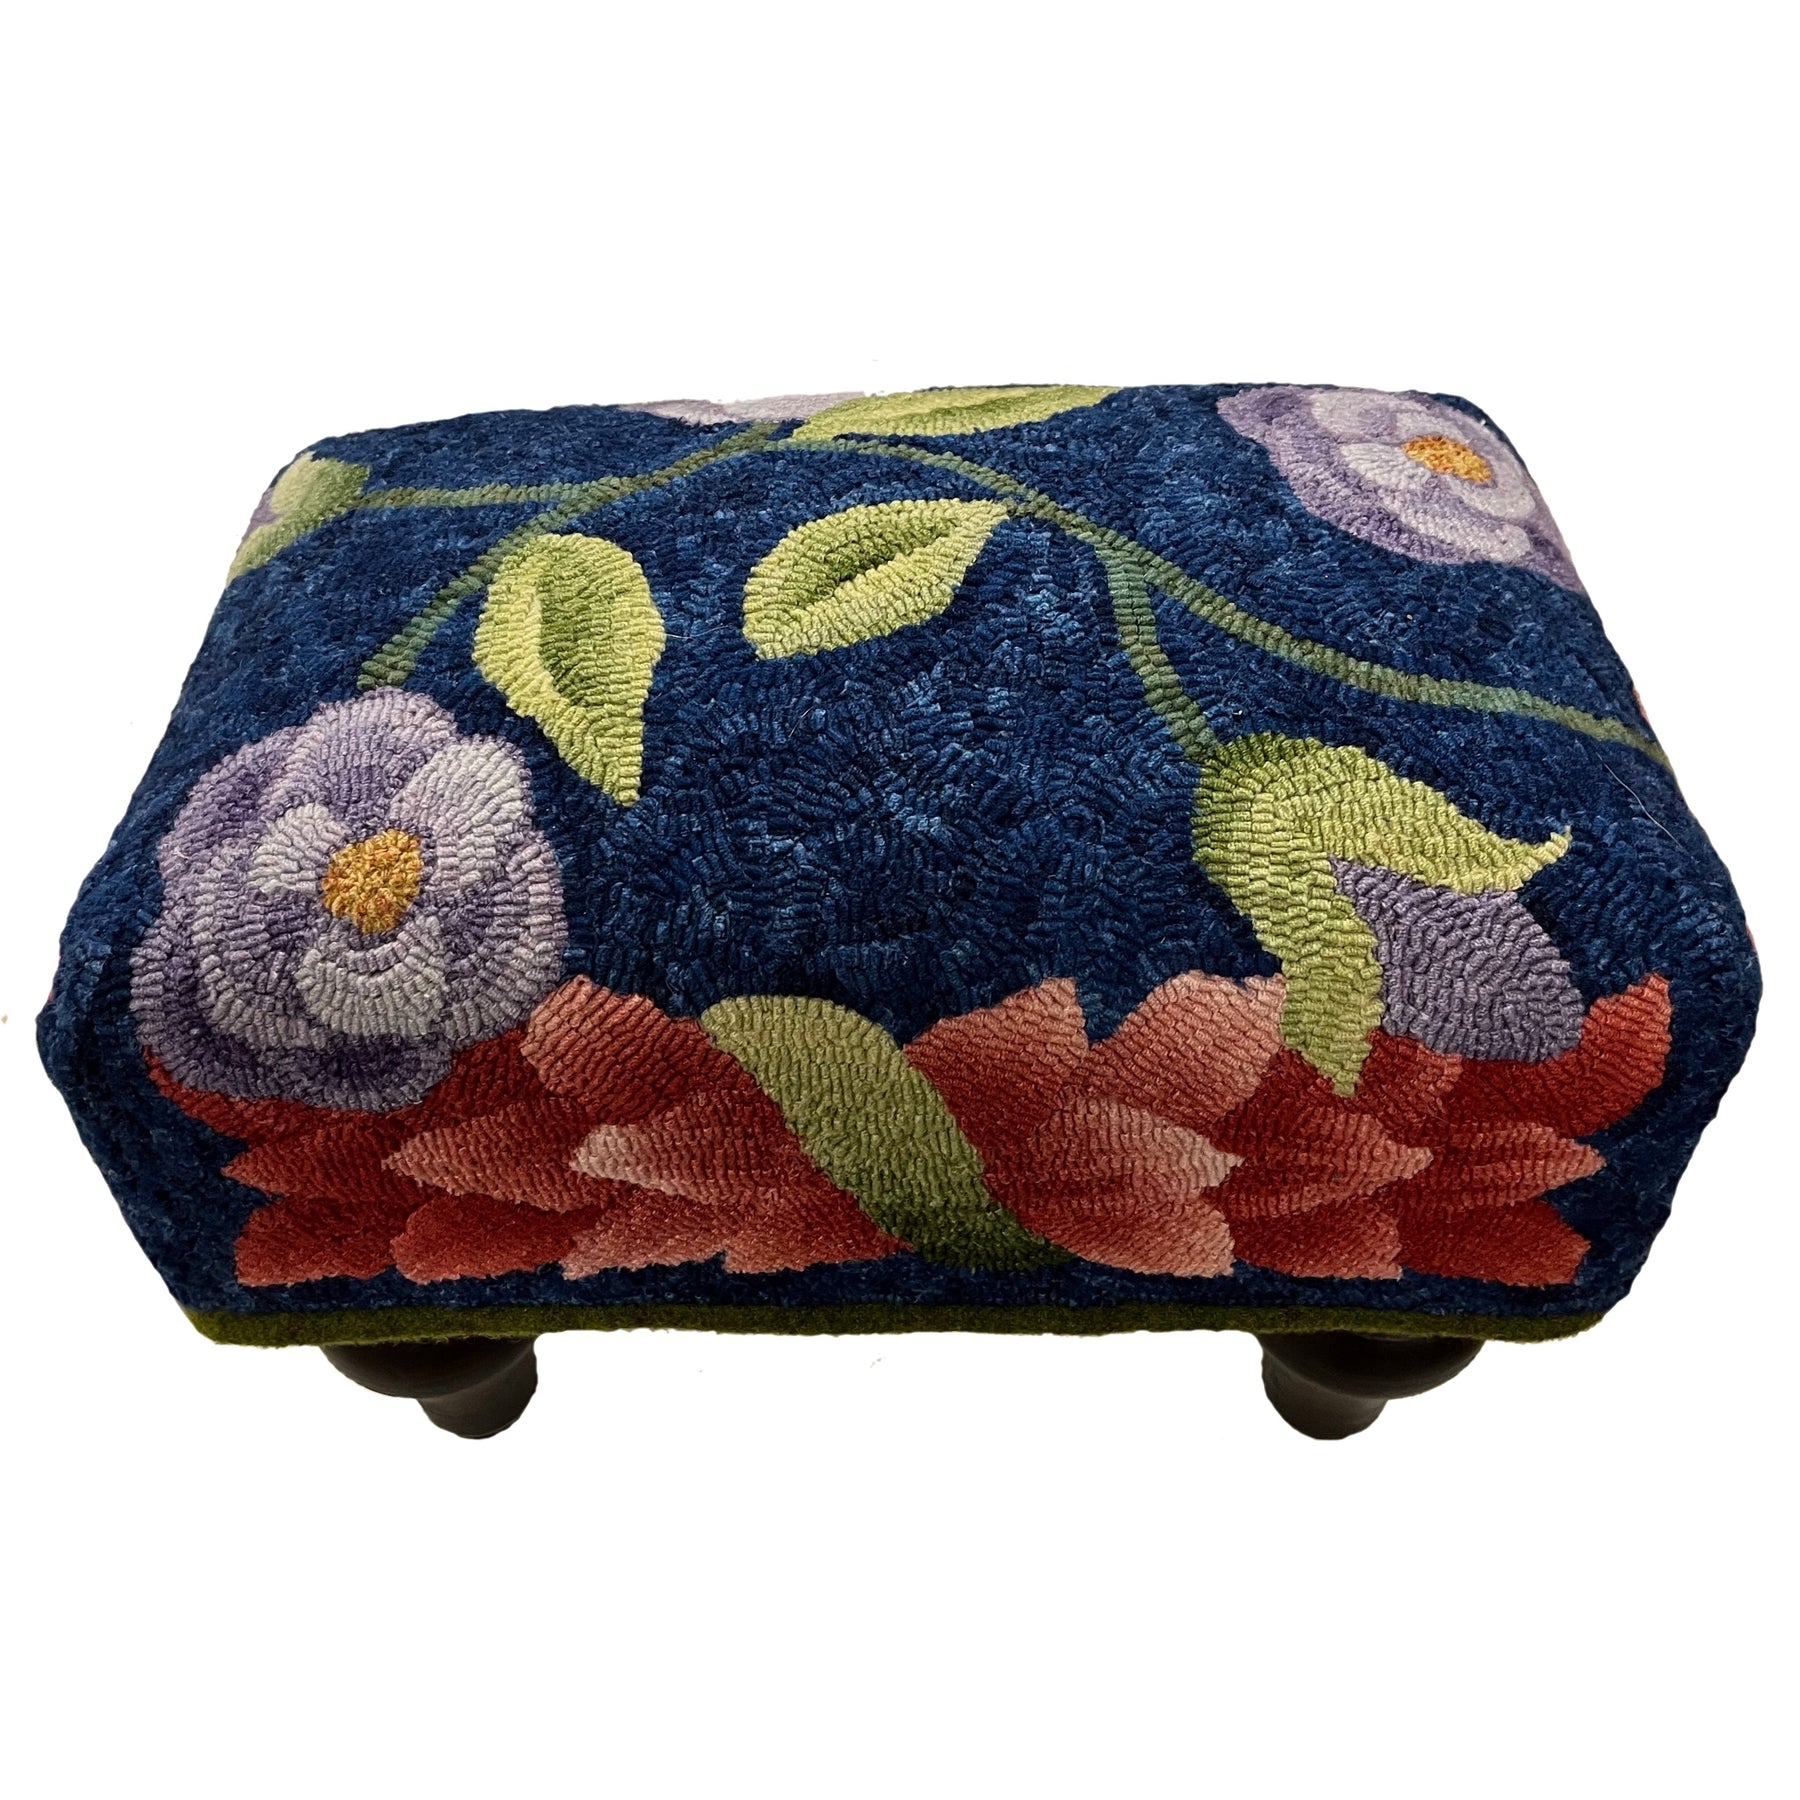 Vines, Wide Cut - Queen Anne Footstool Pattern, rug hooked by Sue Perry